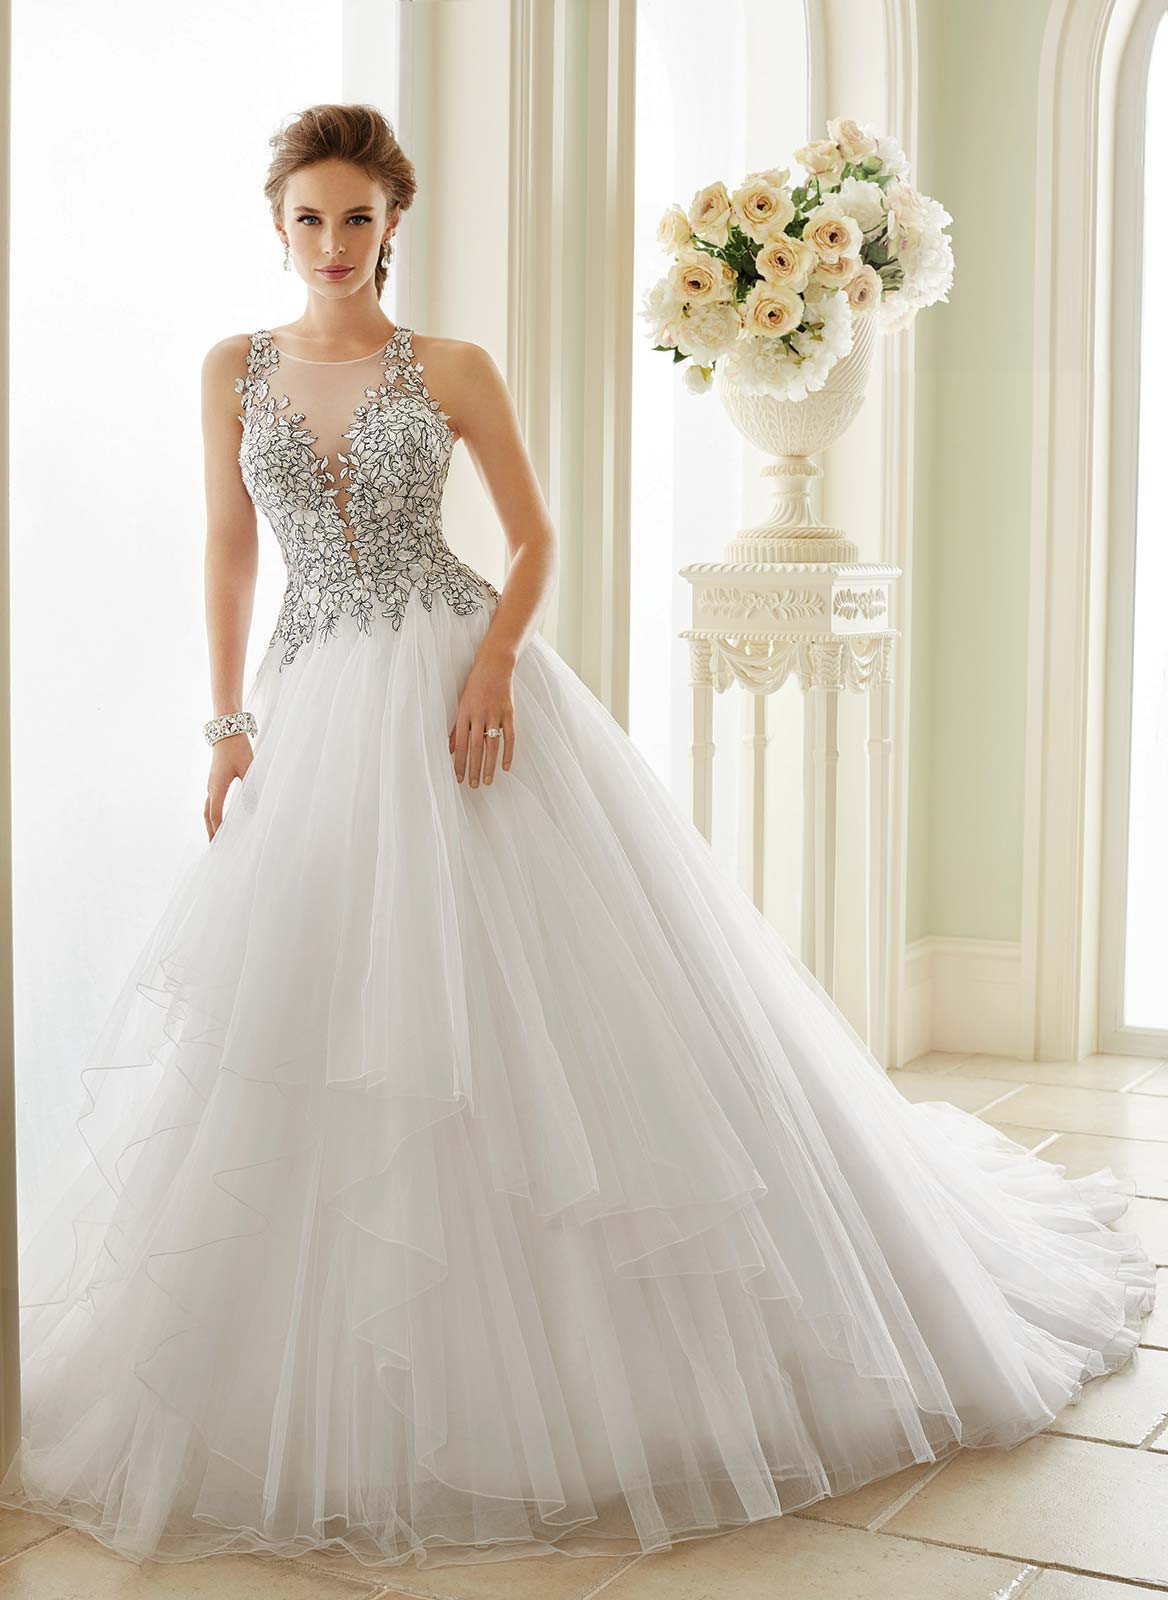 Wedding Dress Styles For Short Brides
 Color and Texture are incorporated in many wedding dress